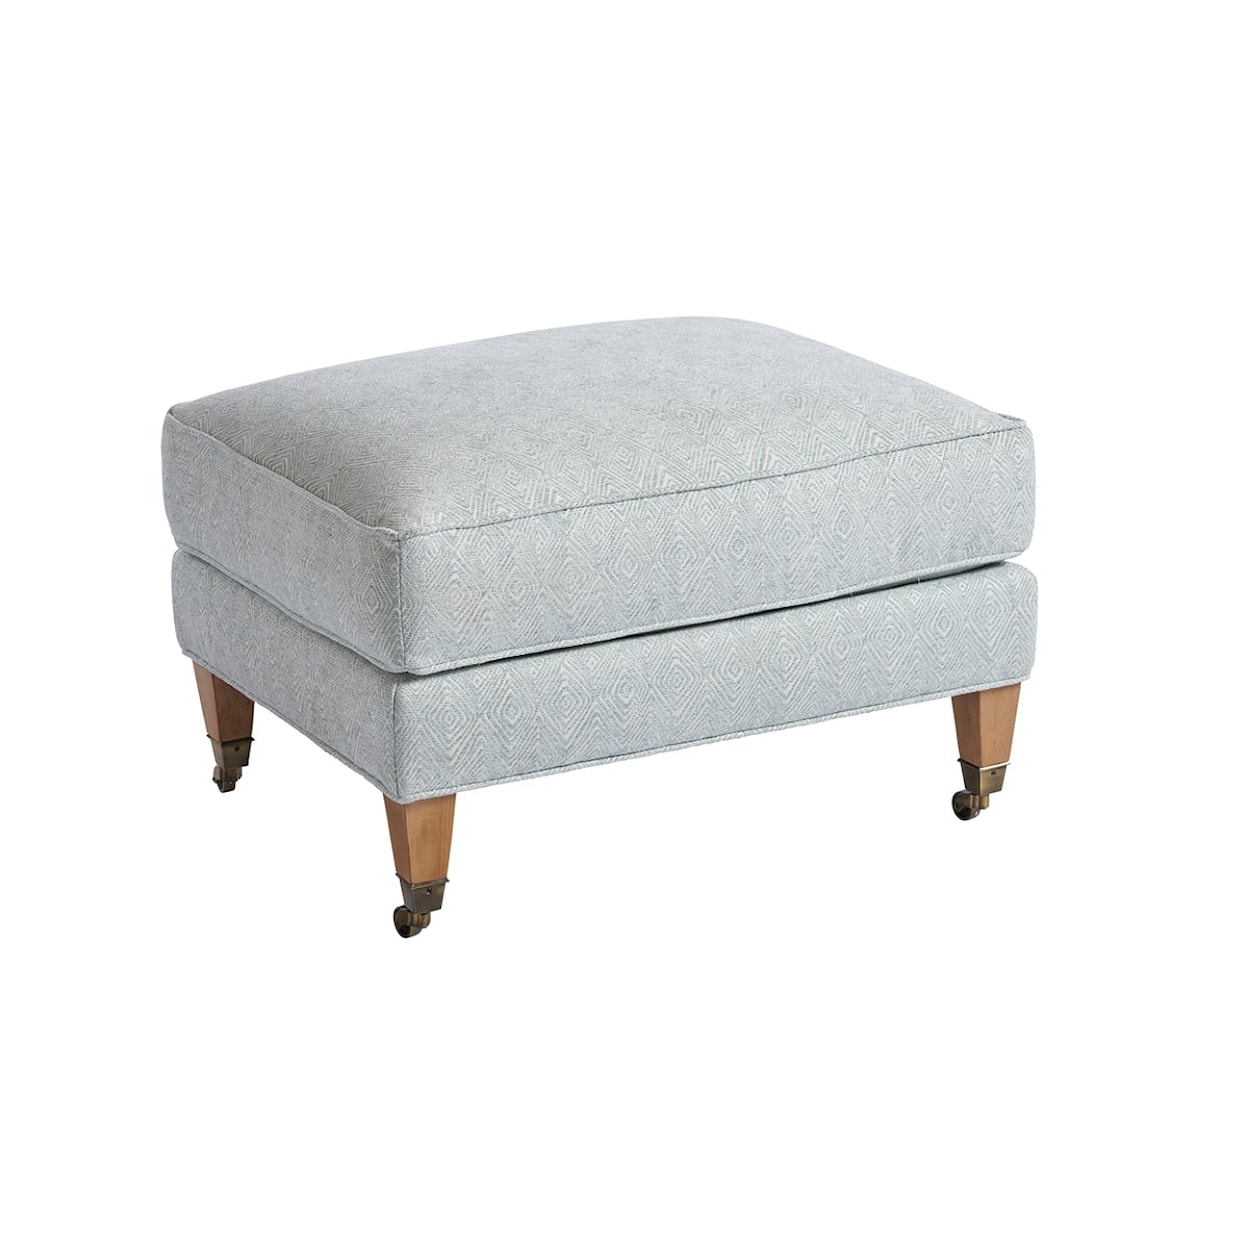 Barclay Butera Barclay Butera Upholstery Sydney Ottoman With Pewter Casters